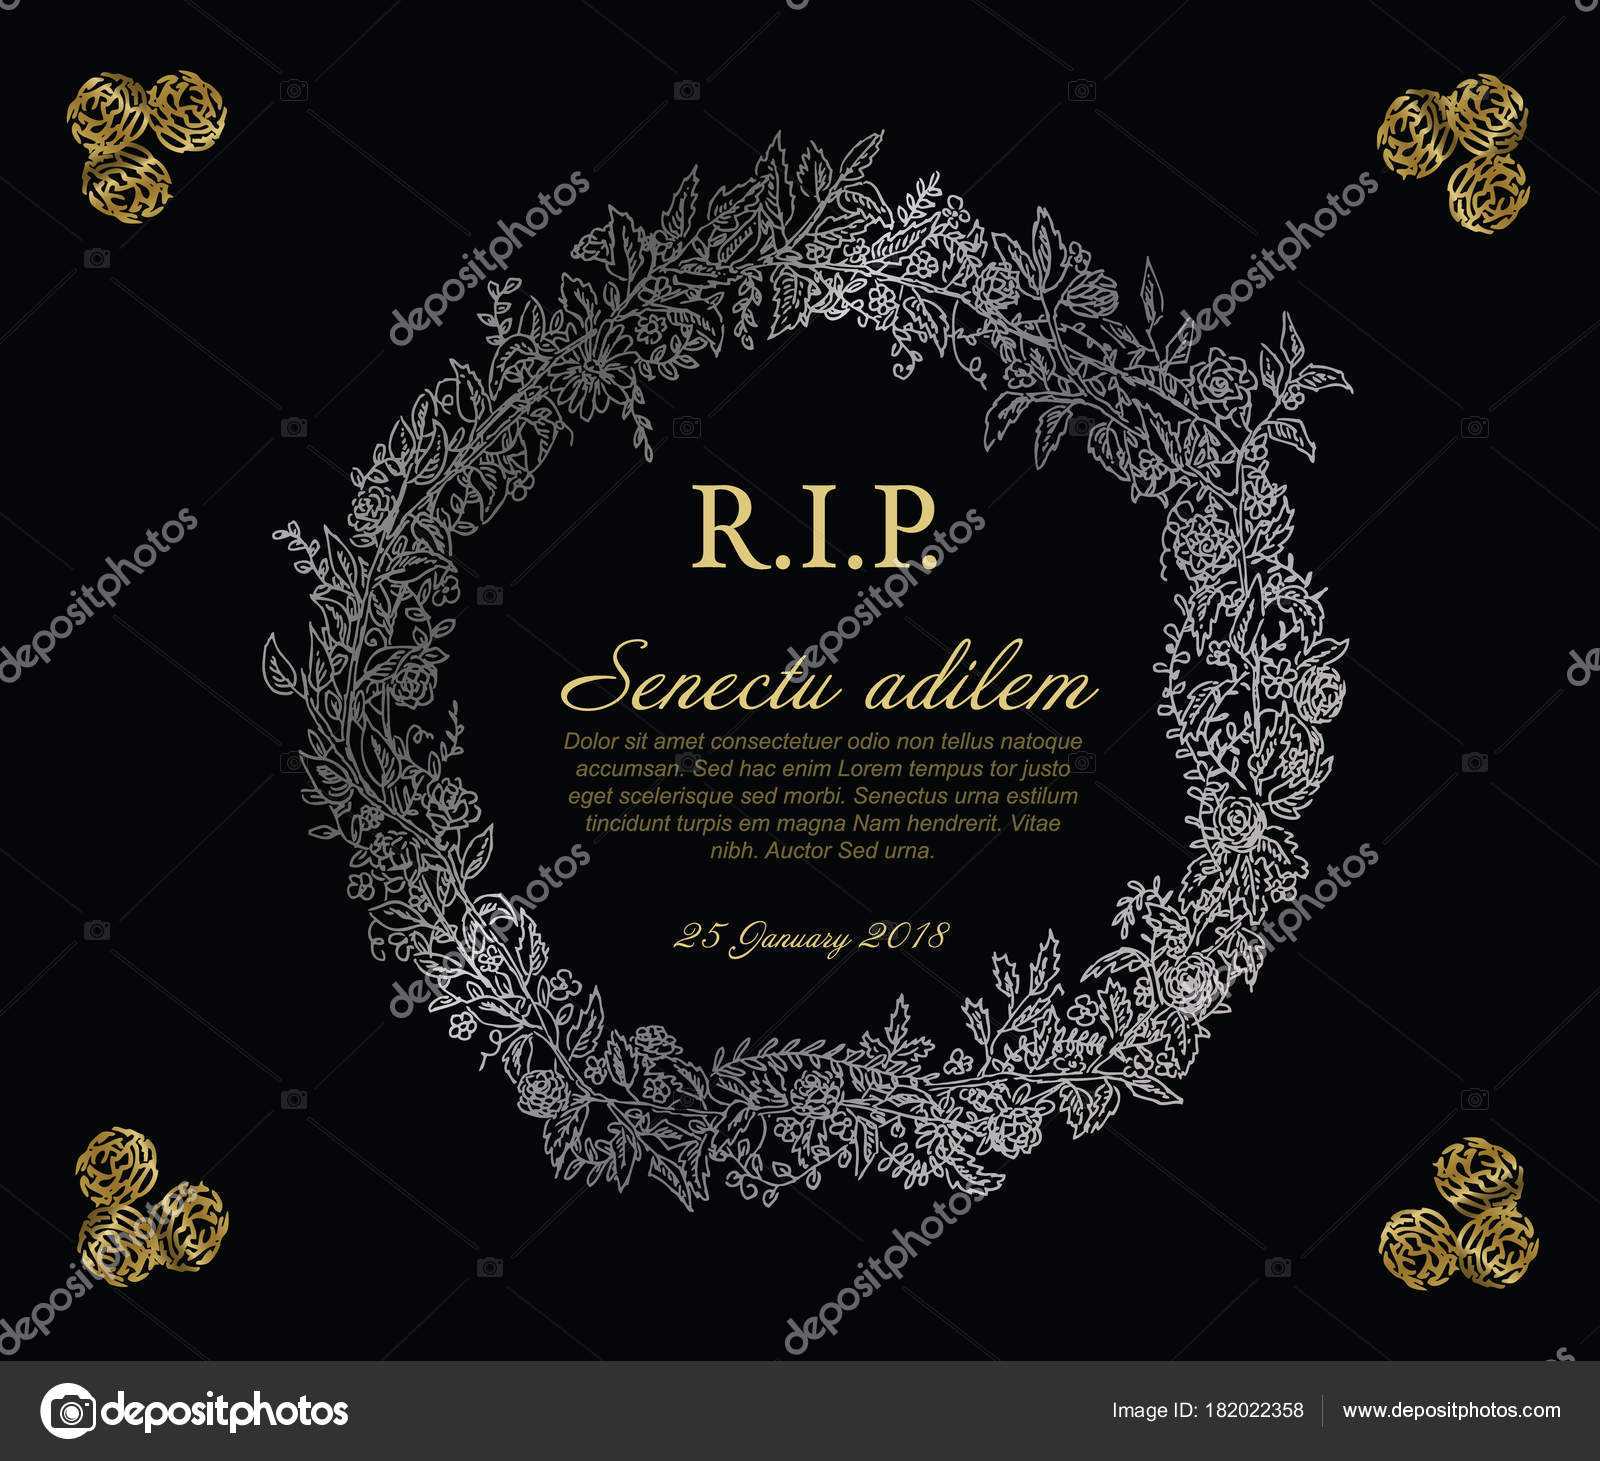 Printable Memorial Card Templates | Silver Golden Flower Throughout Funeral Invitation Card Template